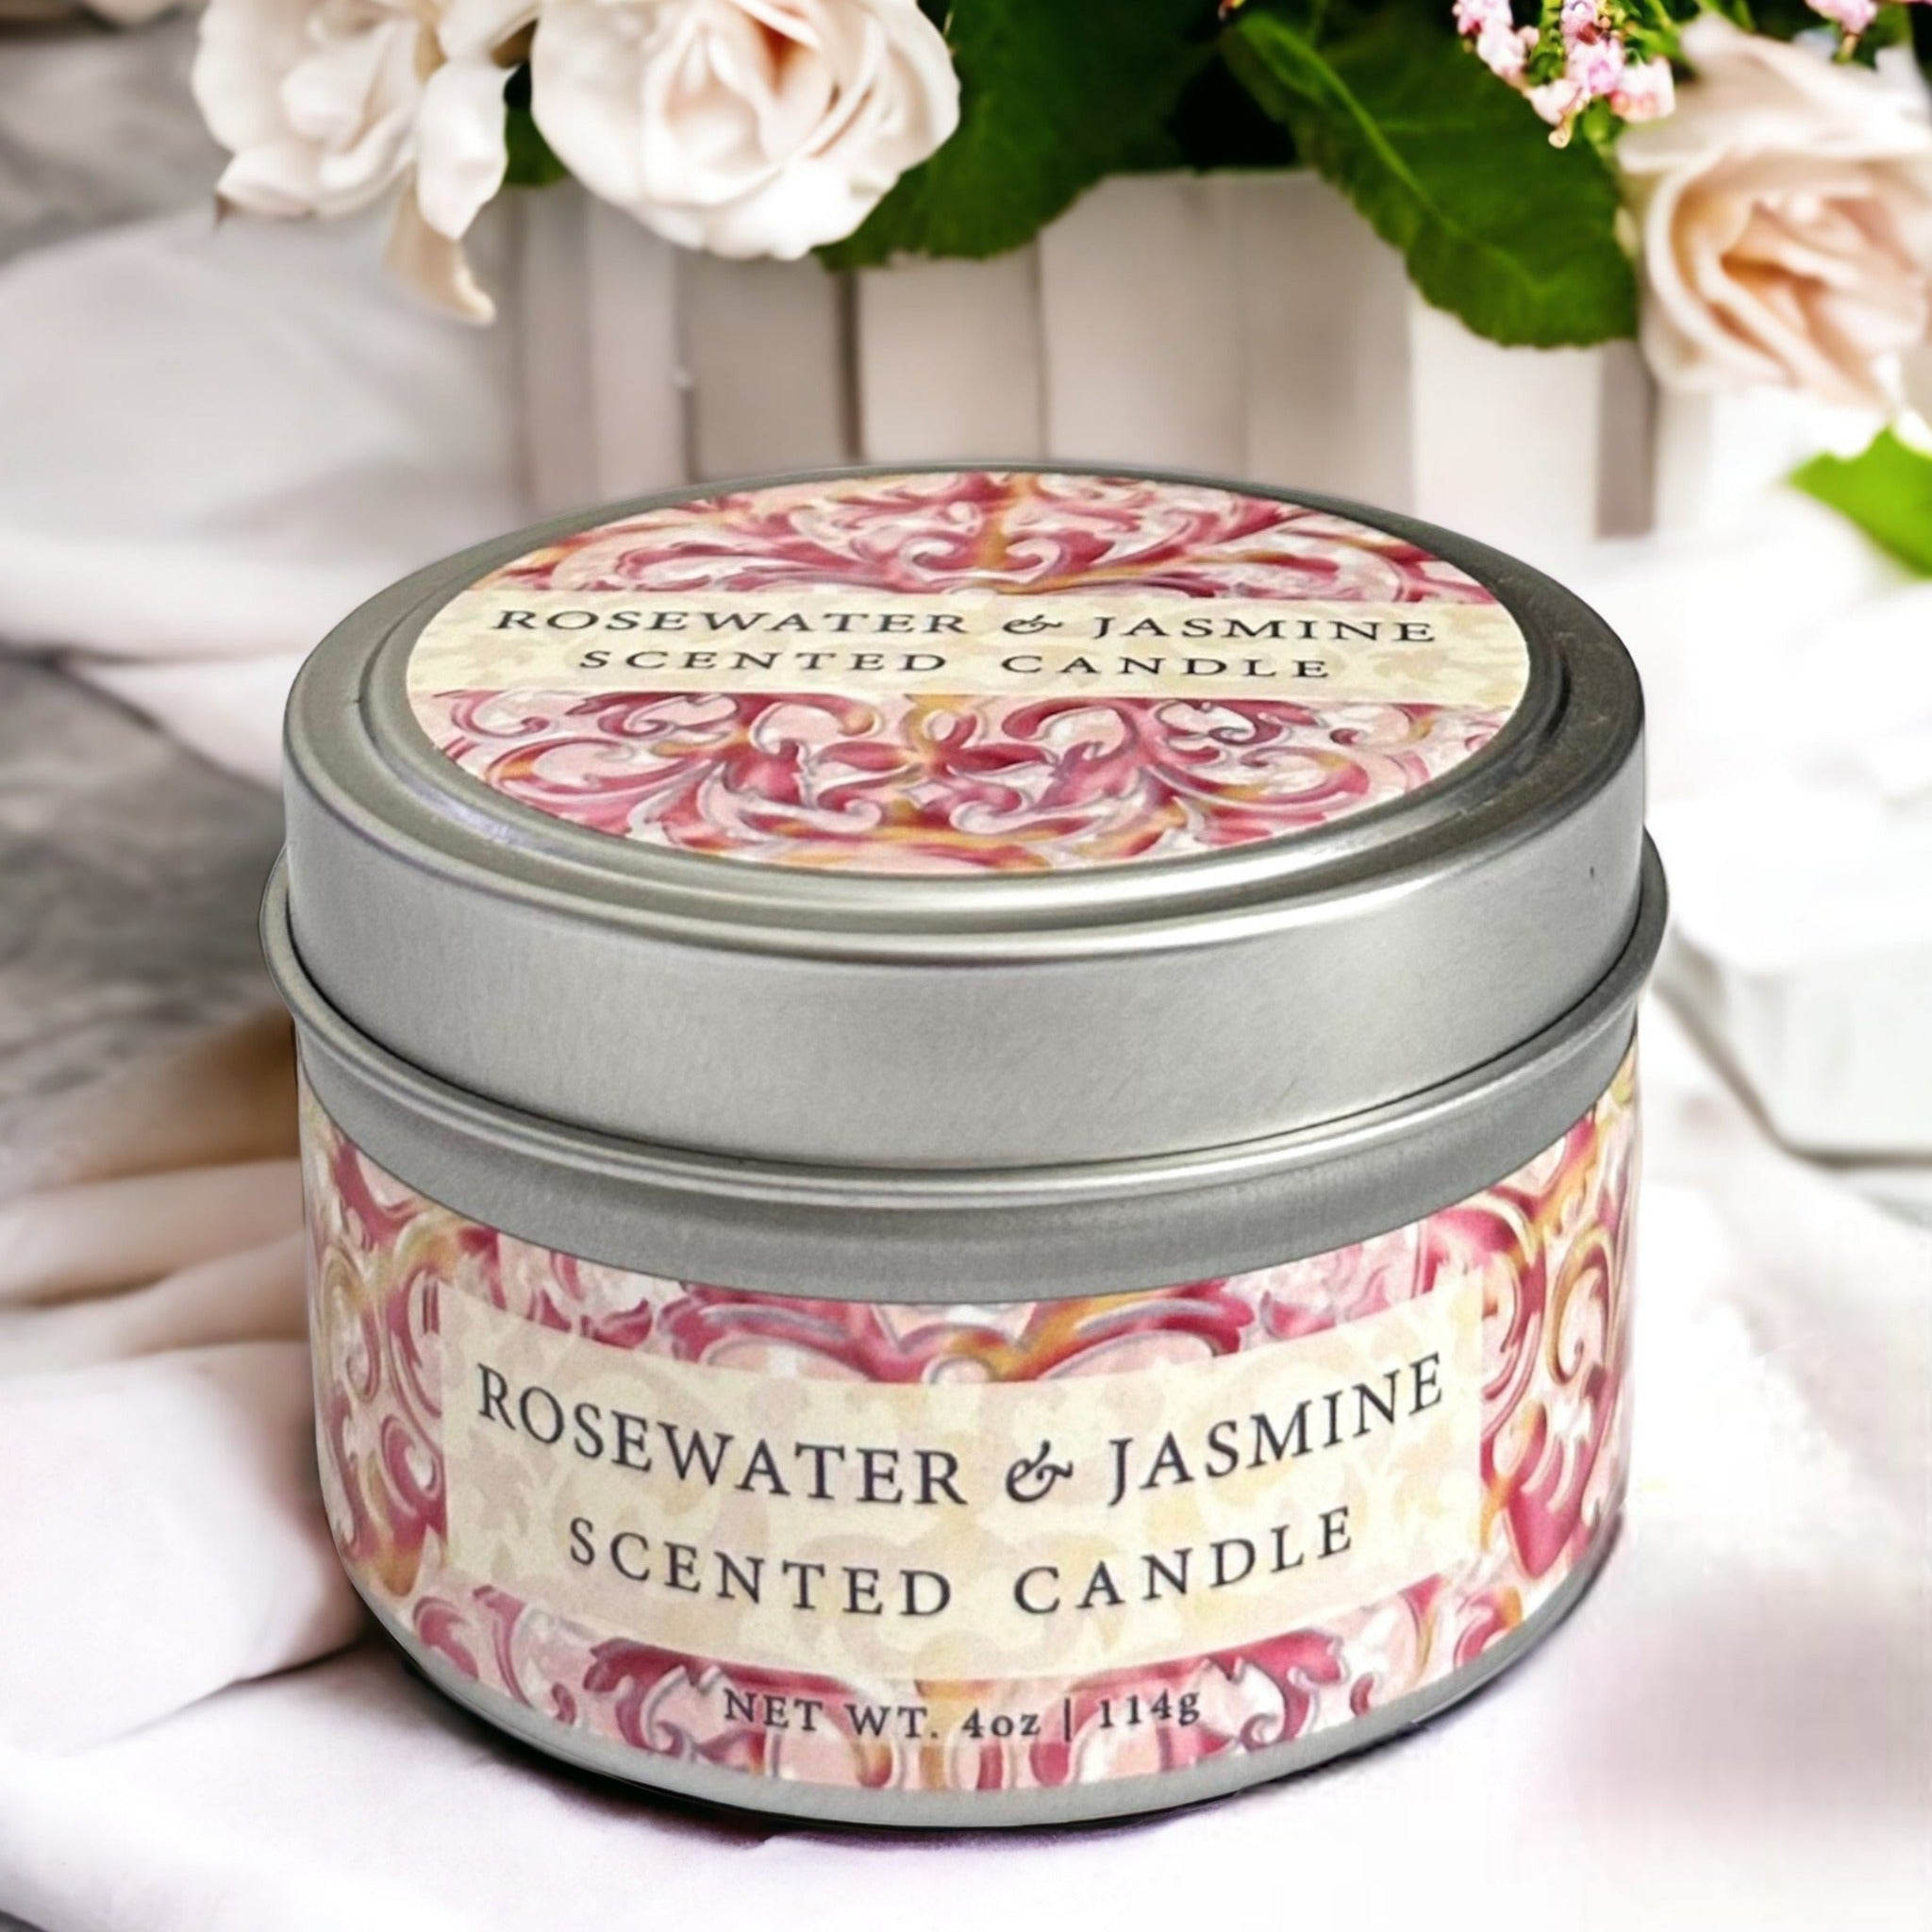 Greenwich Bay Trading Company Rosewater Jasmine Candle